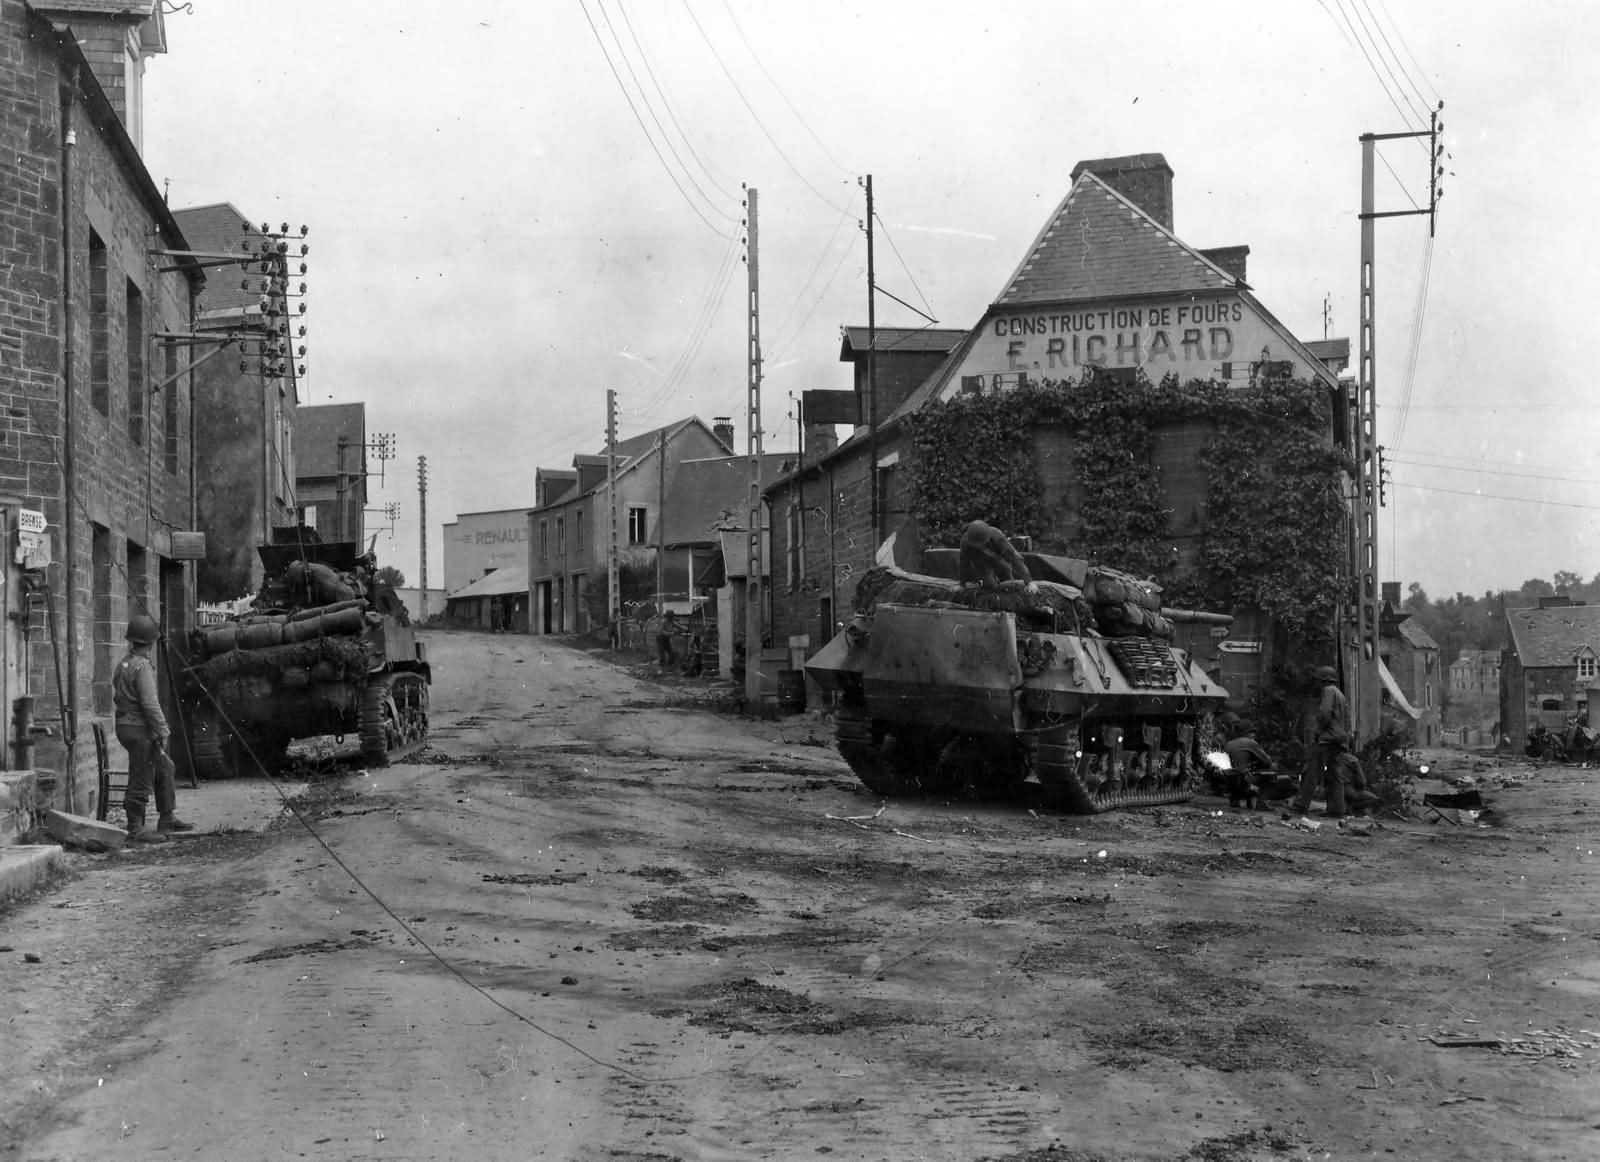 M5_And_M10_Wolverine_2nd_Armored_Division_In_Tesey_Sur_Vire_France_1944